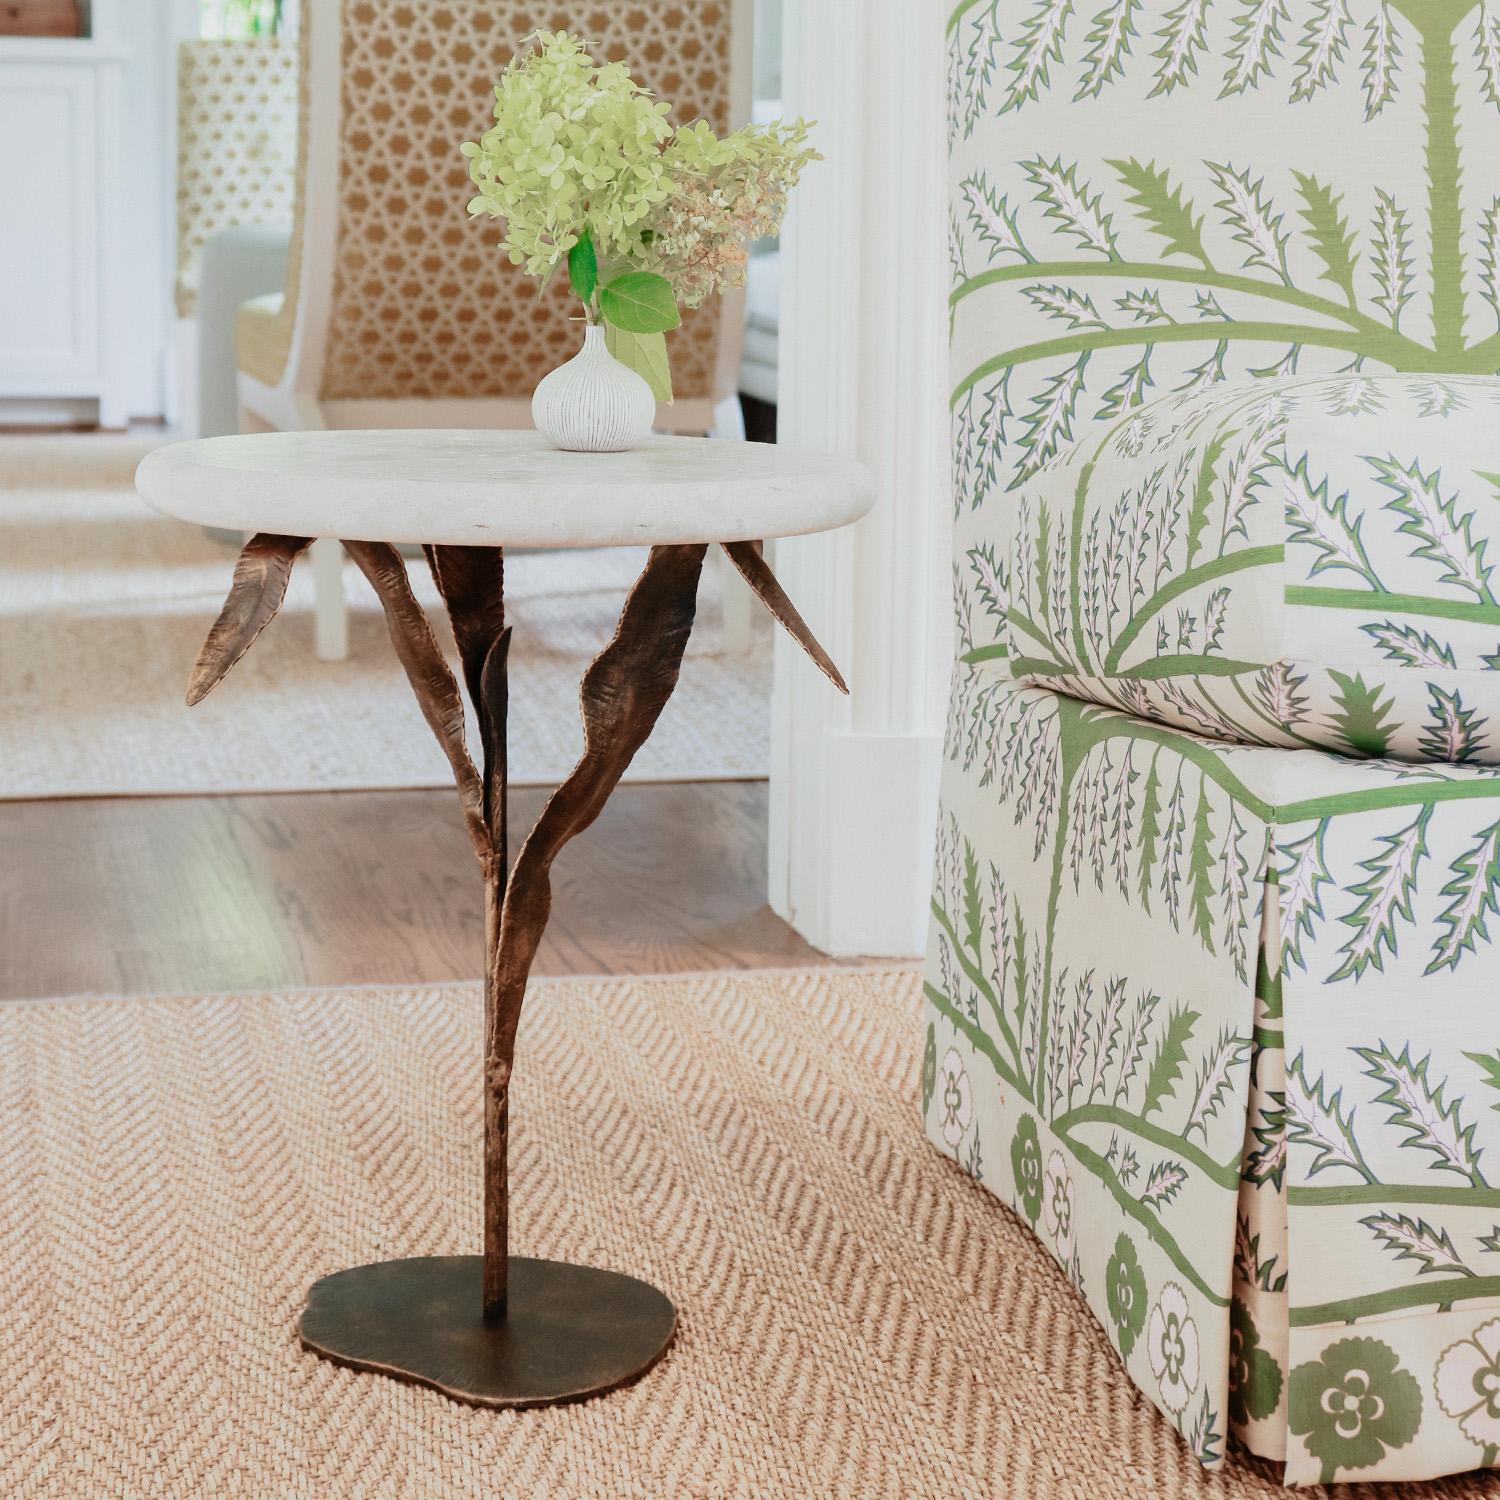 Infuse your elegant interior with the enchanting presence of the Willow Accent Table, meticulously crafted by skilled artisans. This versatile piece can be placed next to an armchair or sofa, in a foyer, or anywhere that calls for an artisan-made